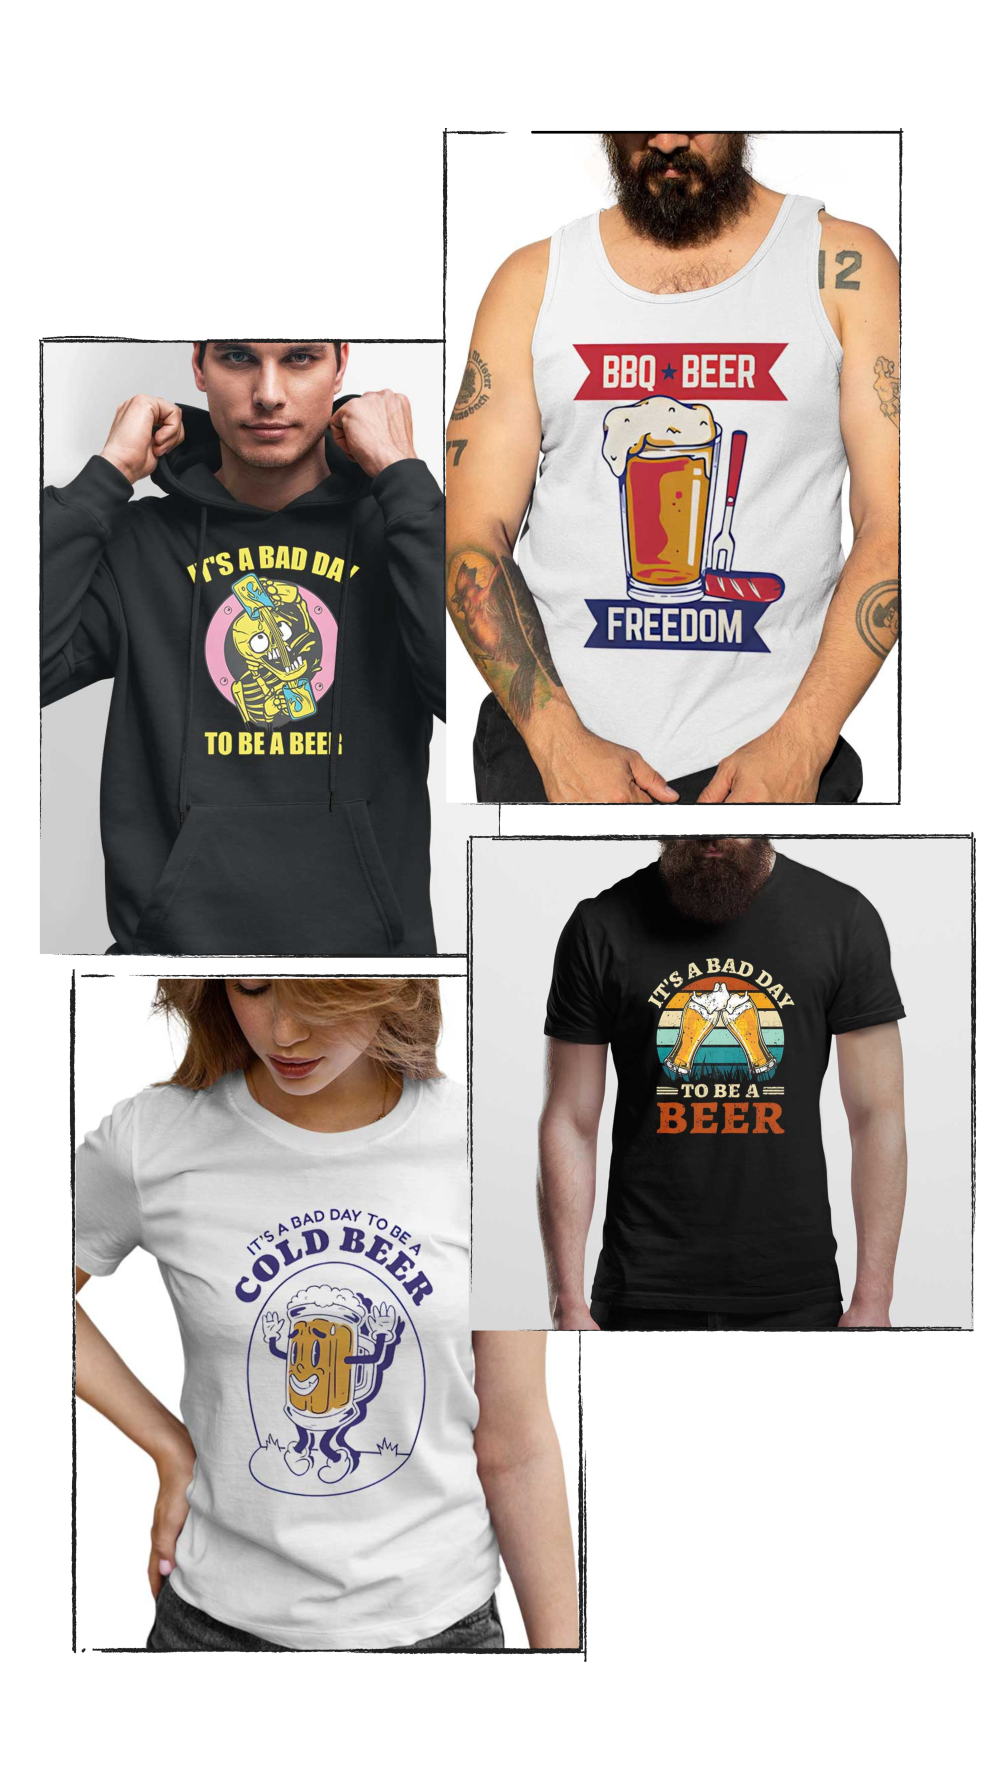 The Rise and Fall of Beer Shirt Fashion Trends